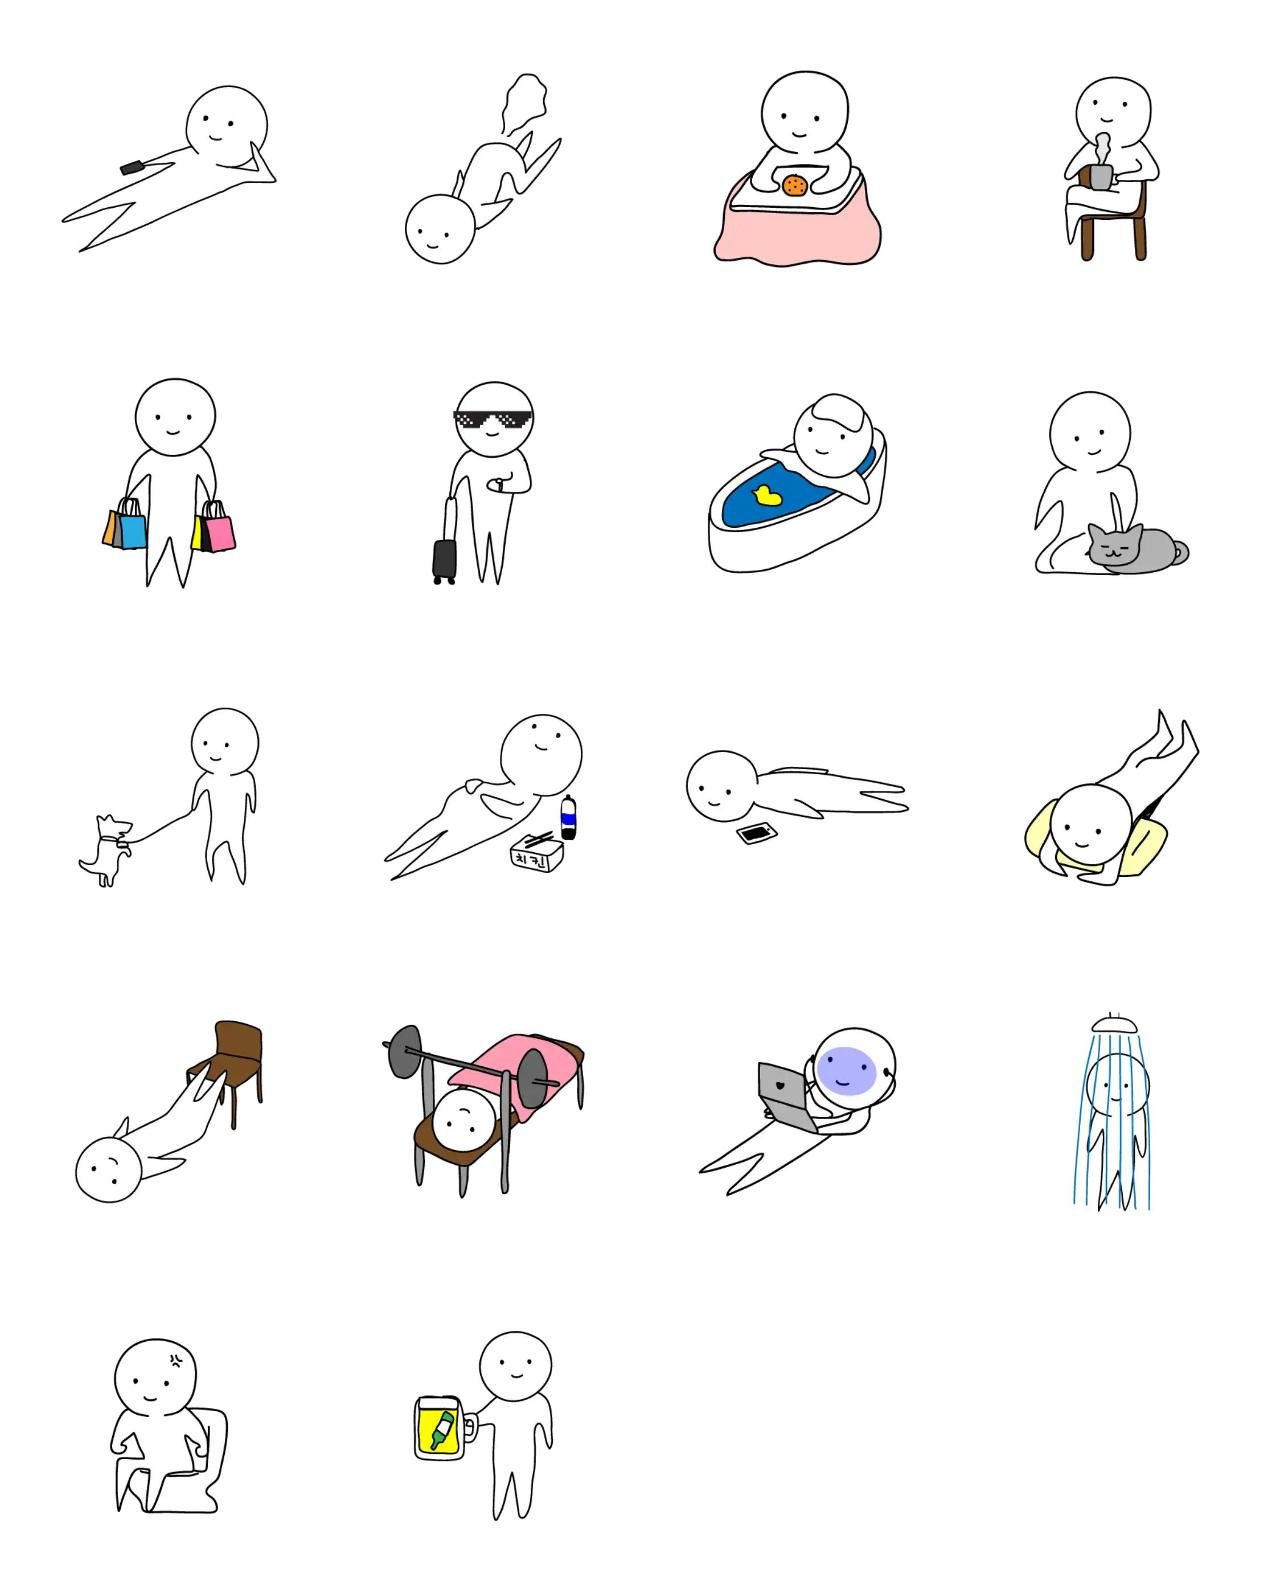 Happy daily life People,Etc. sticker pack for Whatsapp, Telegram, Signal, and others chatting and message apps